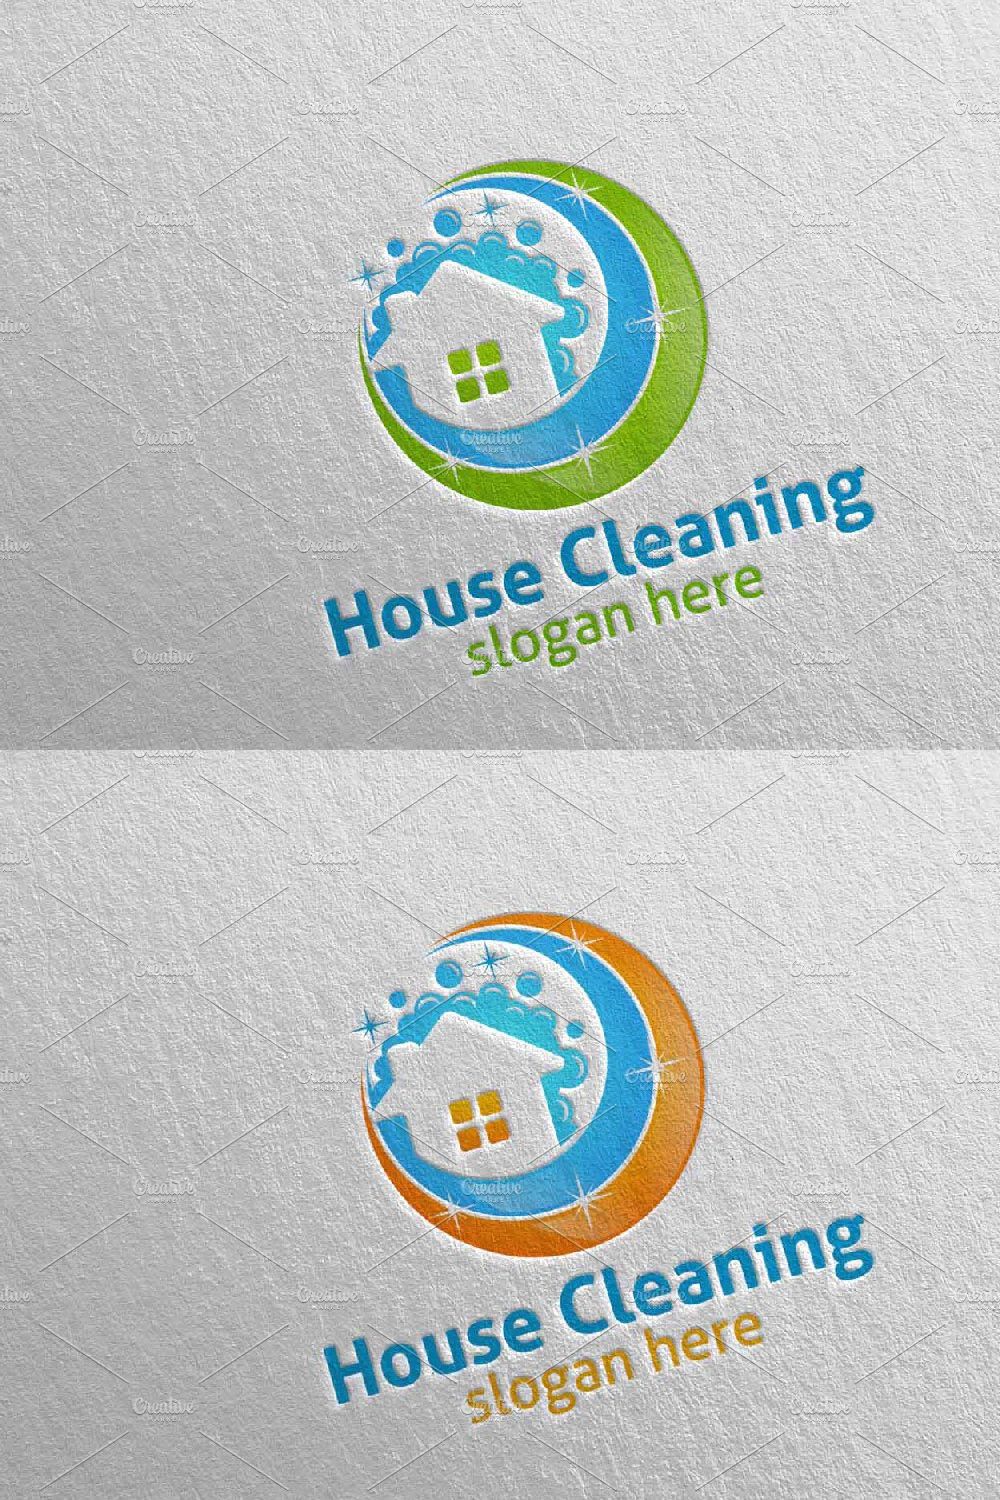 House cleaning services vector logo pinterest preview image.